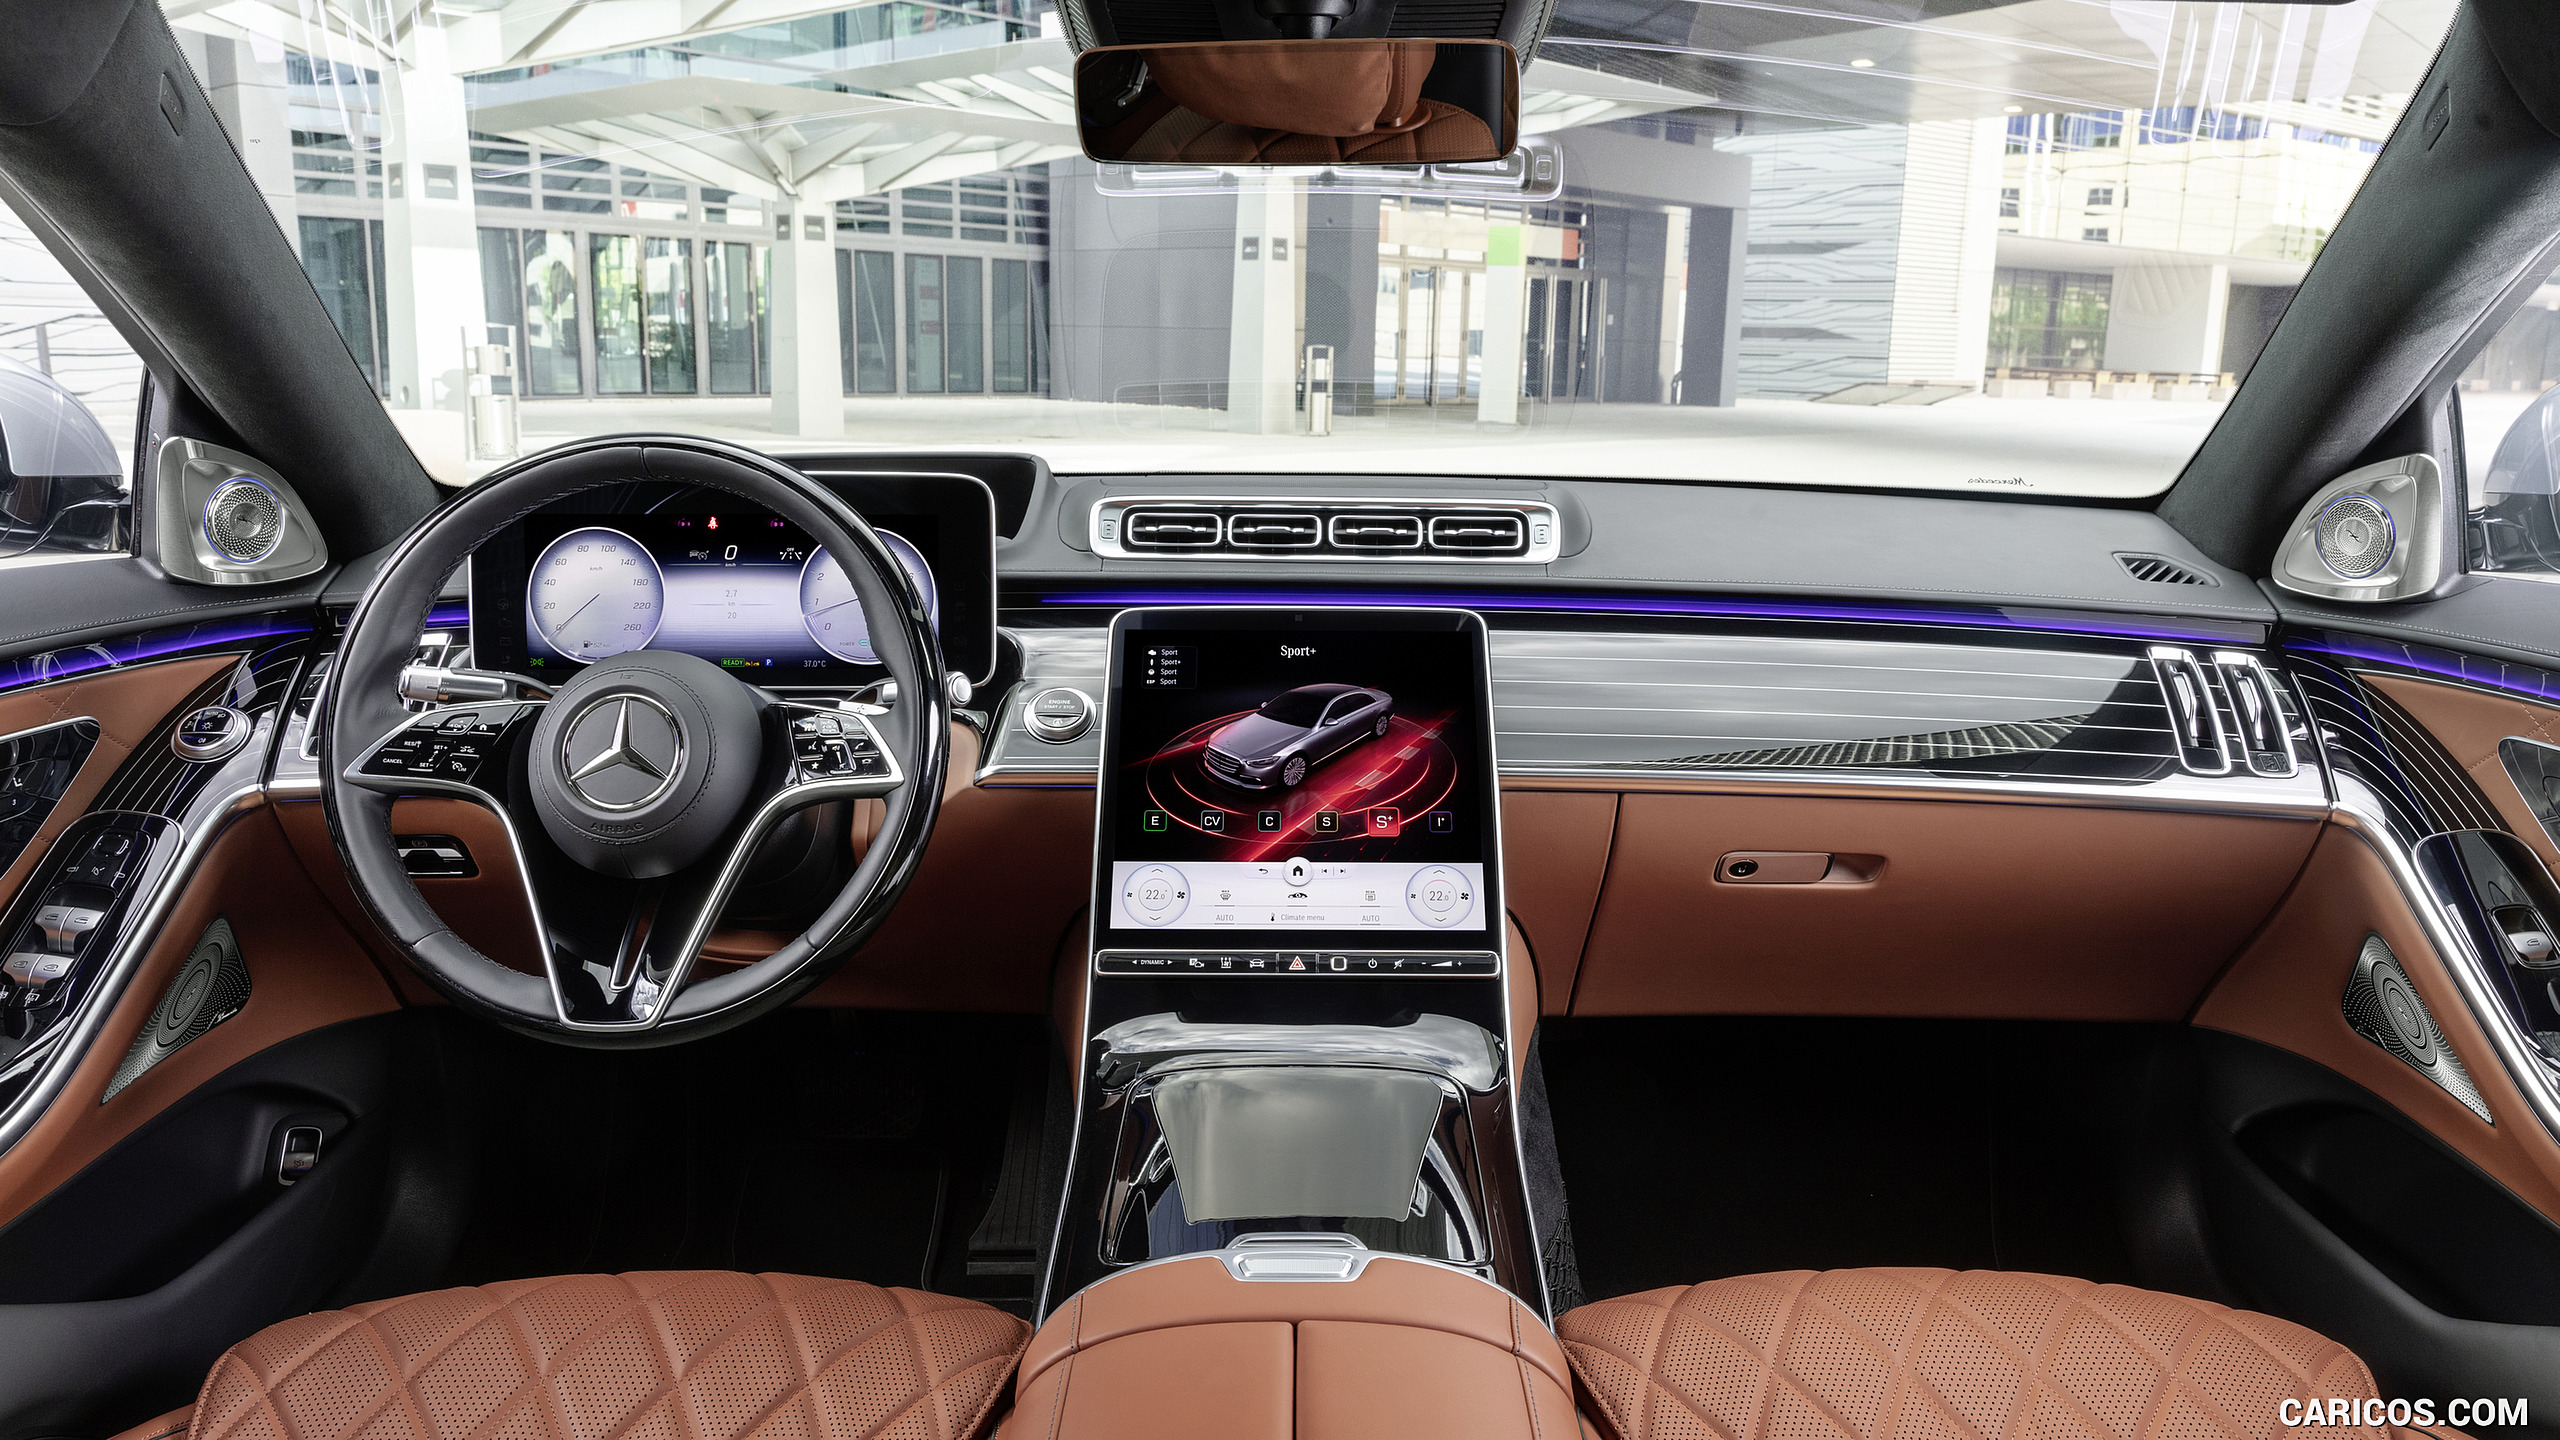 2021 Mercedes-Benz S-Class (Color: Leather Siena Brown) - Interior, Cockpit, #105 of 316